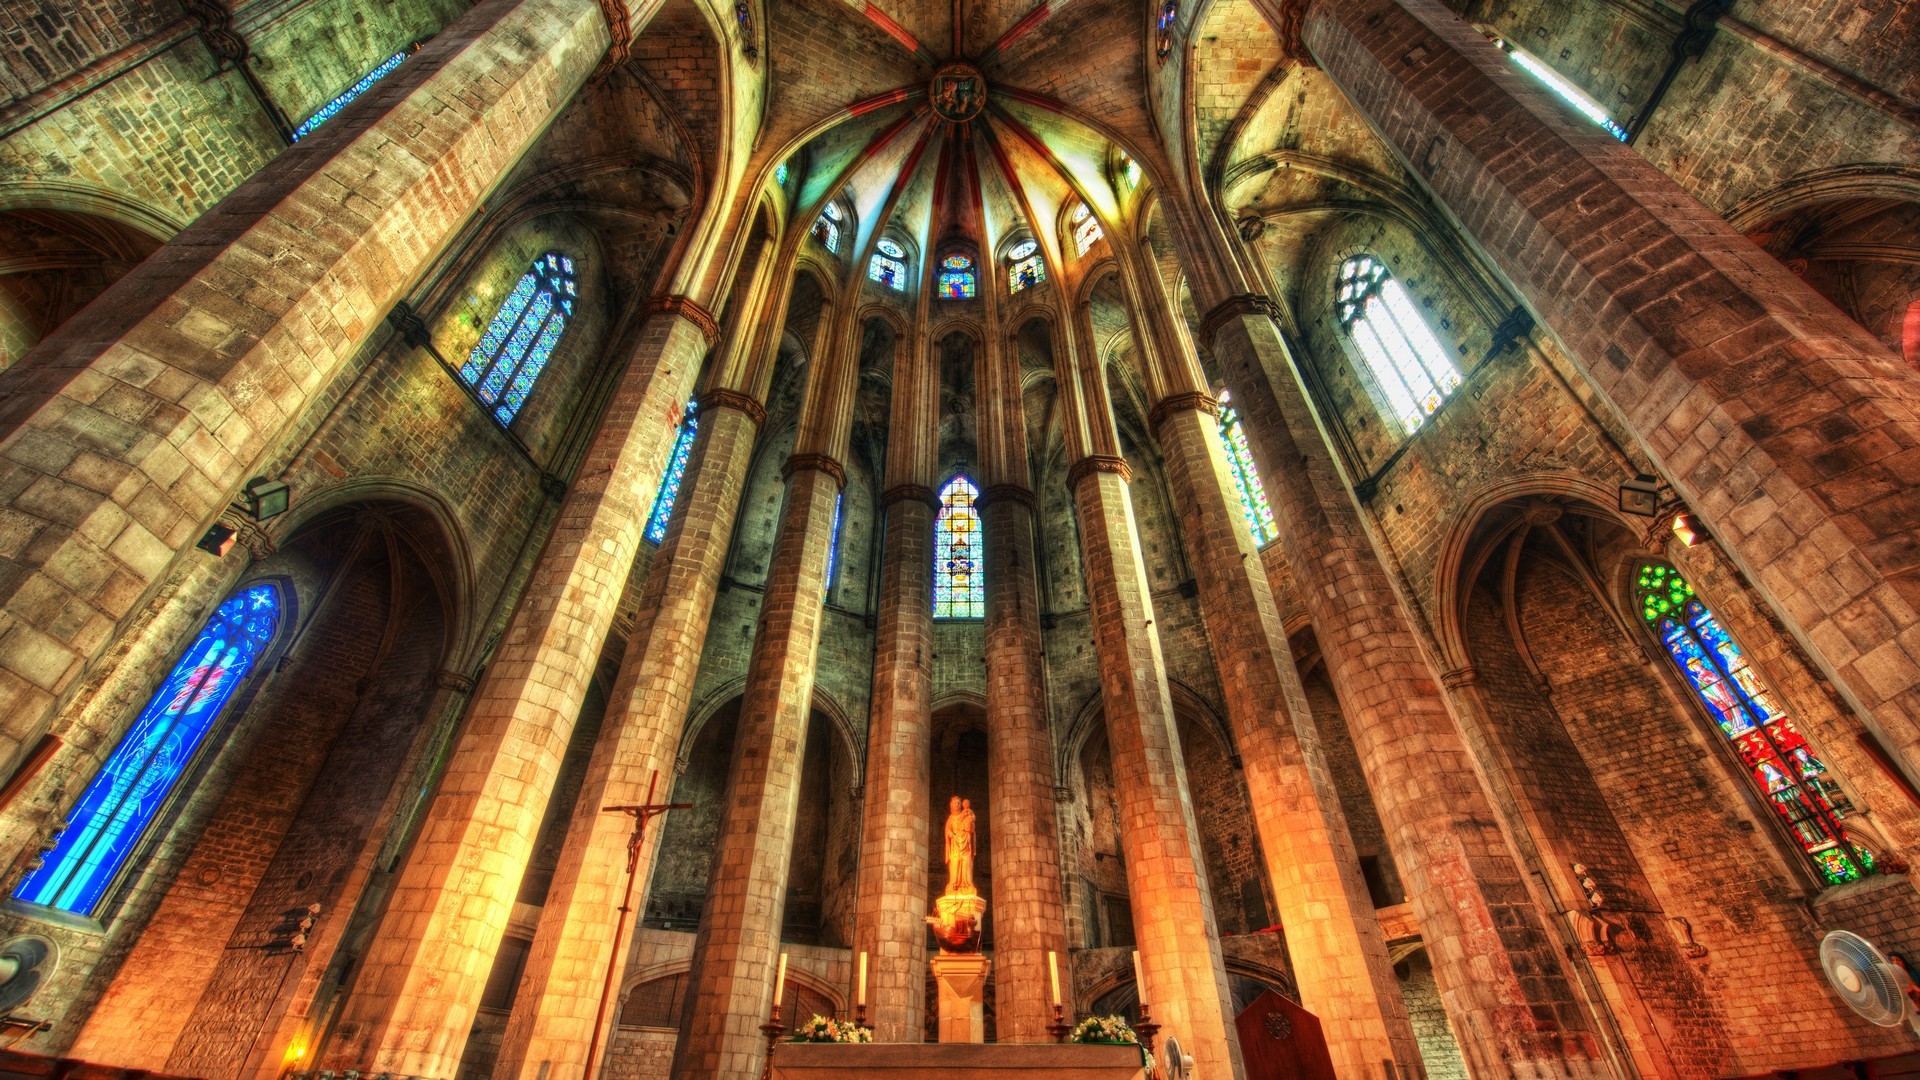 General 1920x1080 HDR indoors church Barcelona Spain architecture